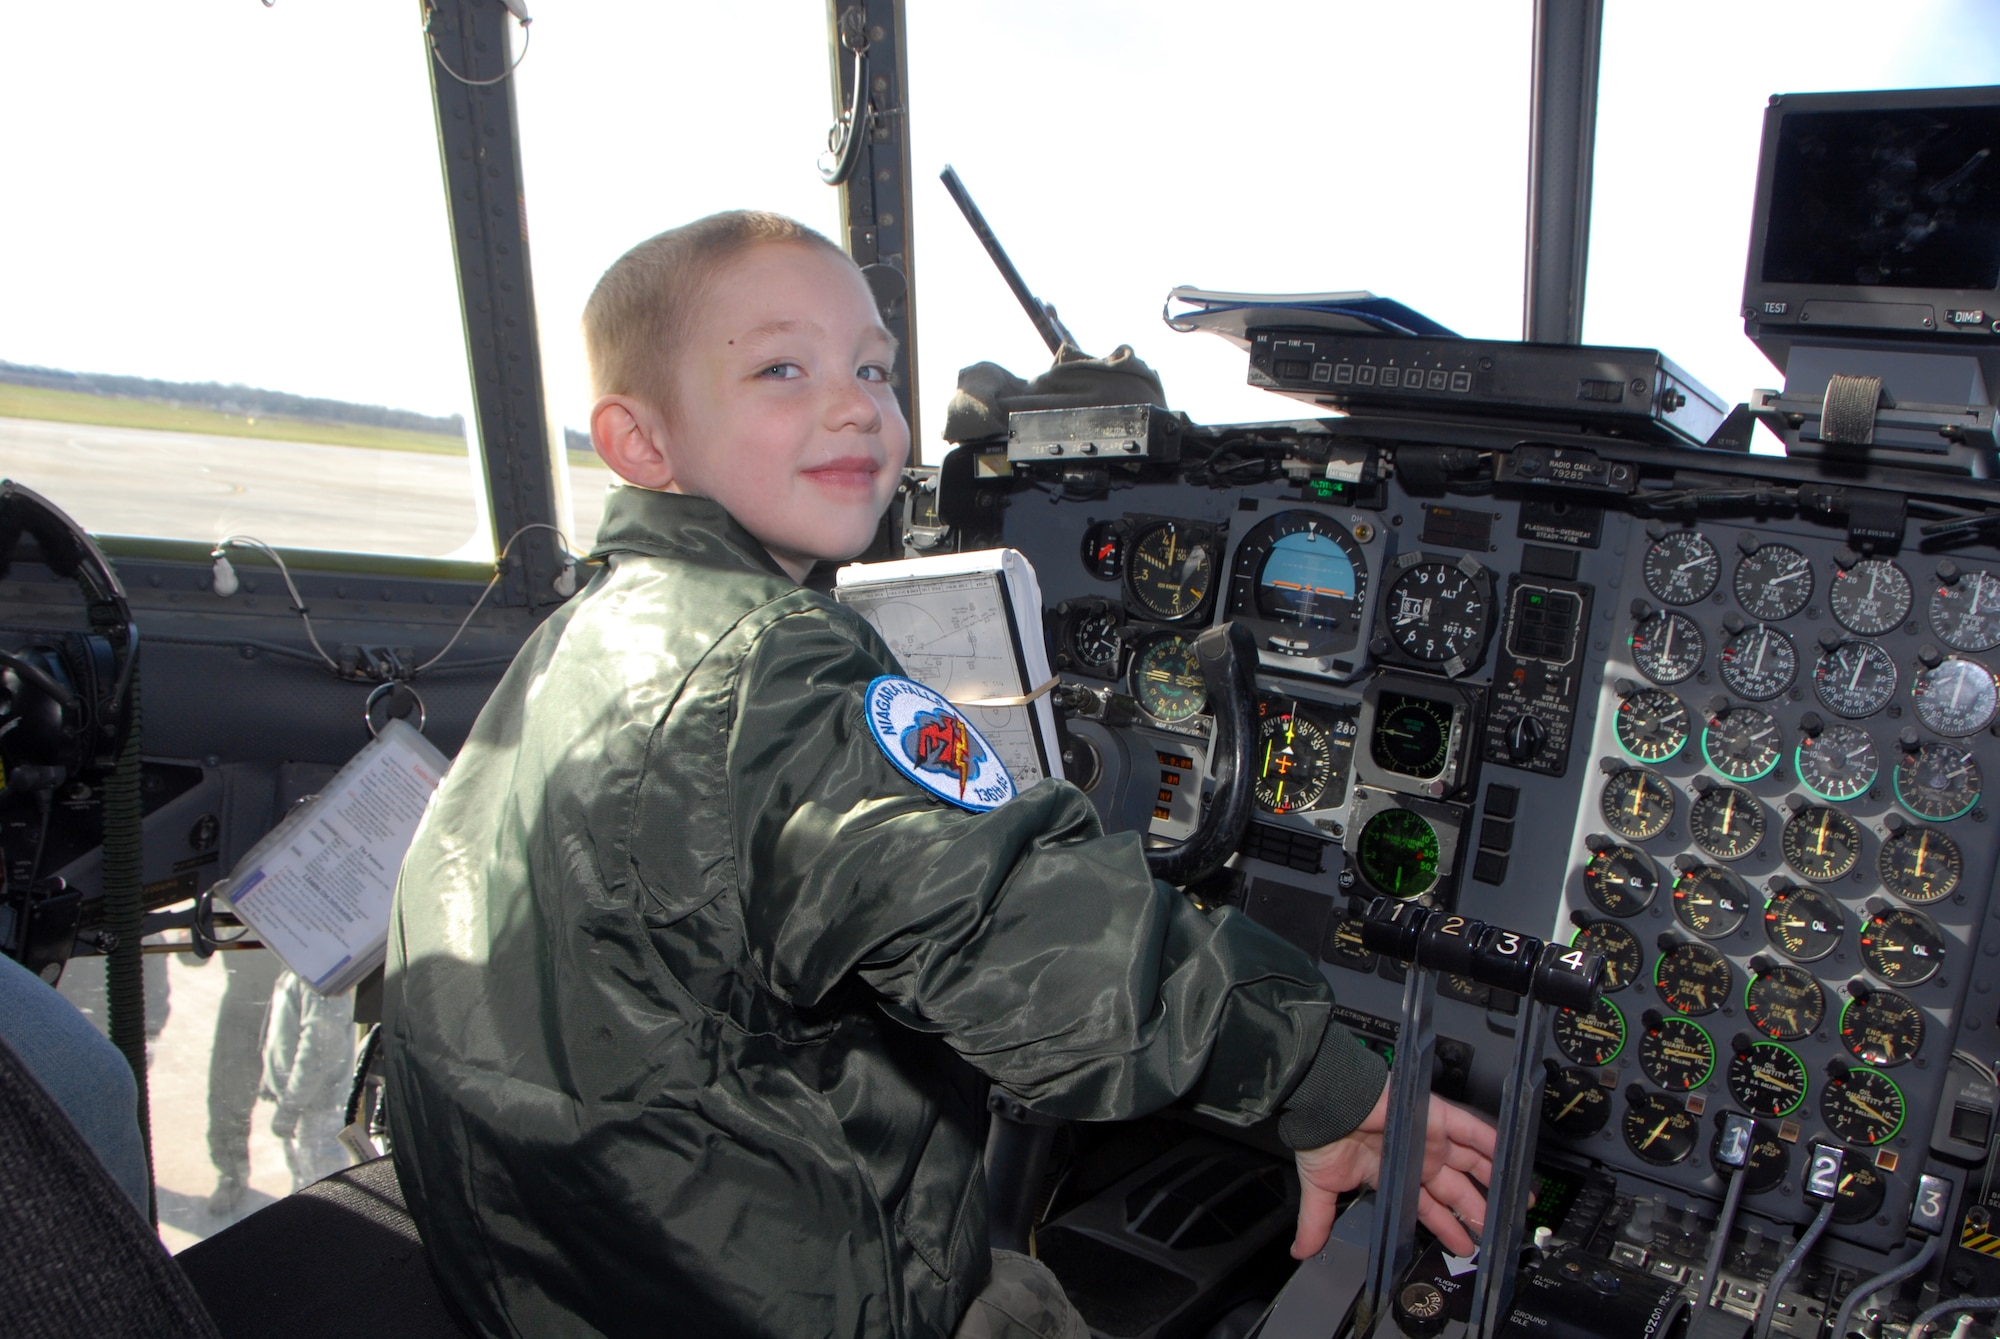 Five-year-old cancer survivor, Donovan Benzin became a Guardsman for a day at the 107th Airlift Wing, Niagara Falls ARS. Here he is exploring the cockpit controls of the C-130 aircraft.